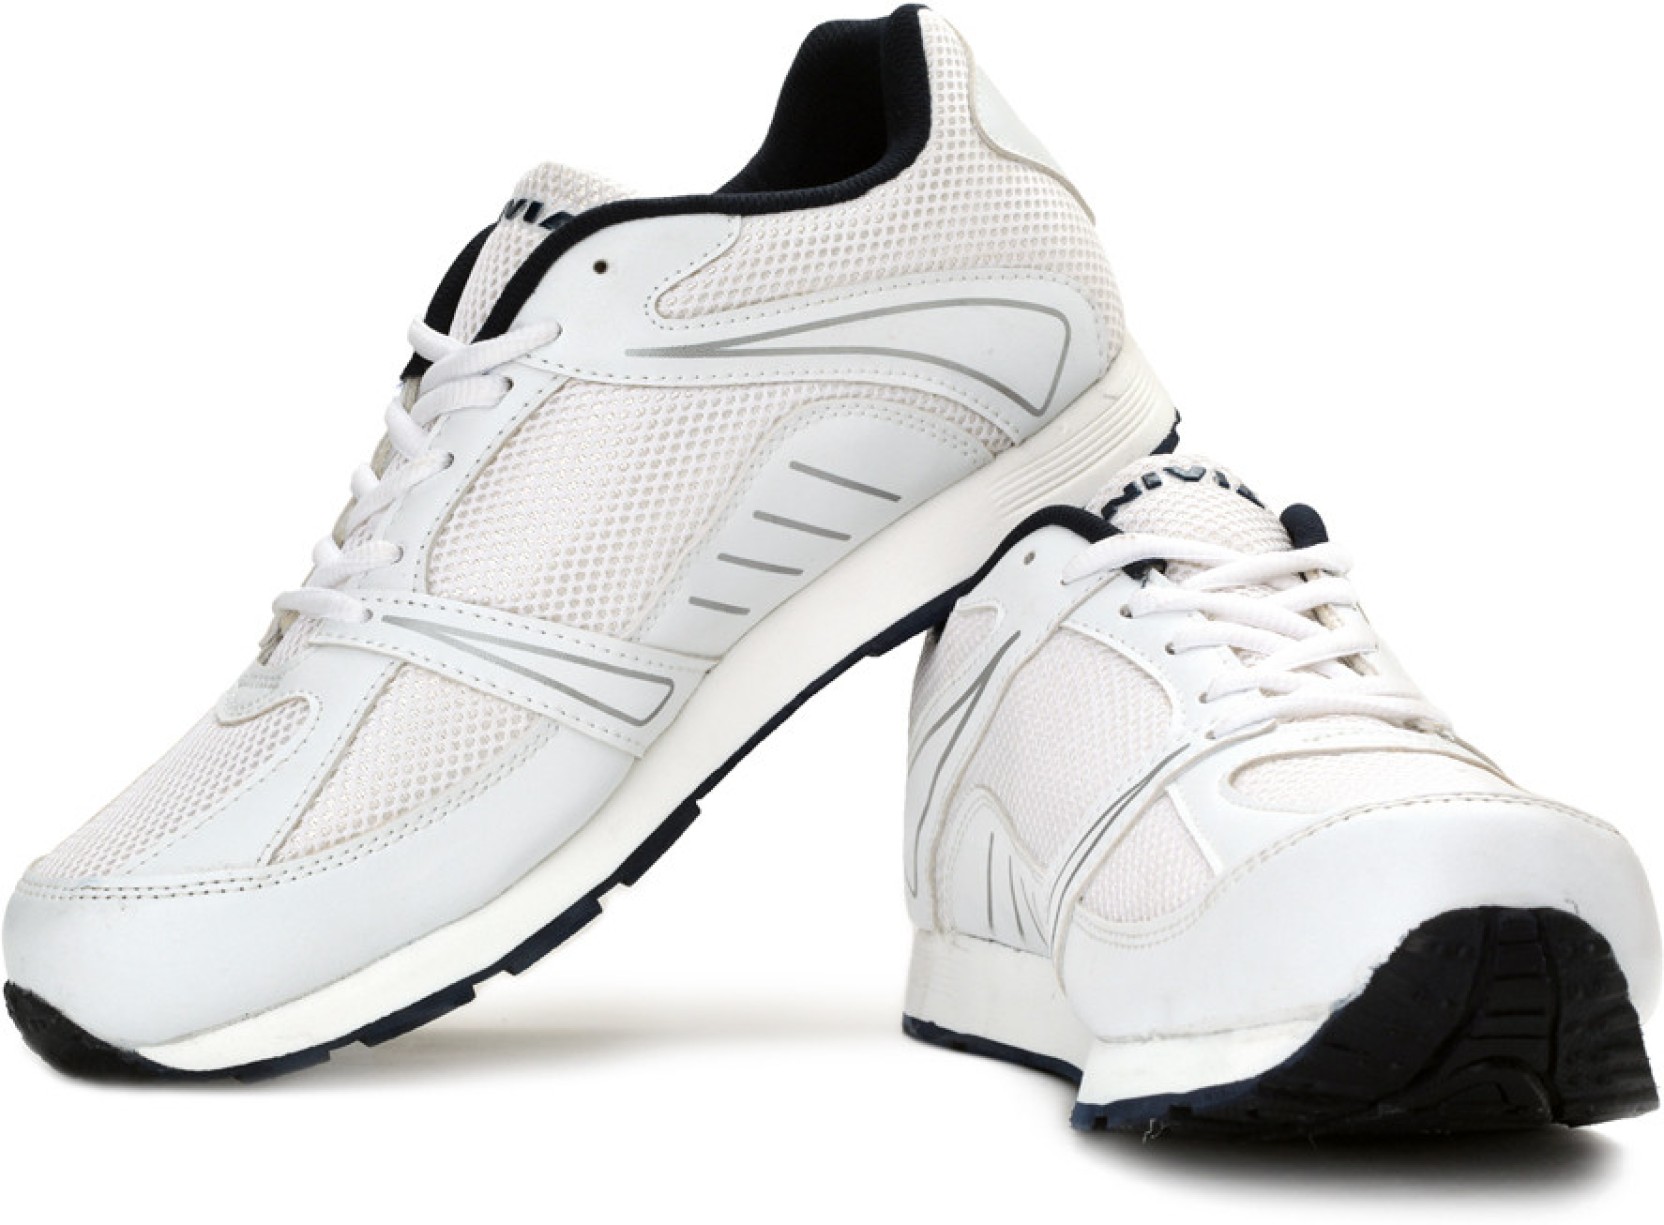 Nivia Hawks Running Shoes - Buy White Color Nivia Hawks Running Shoes ...